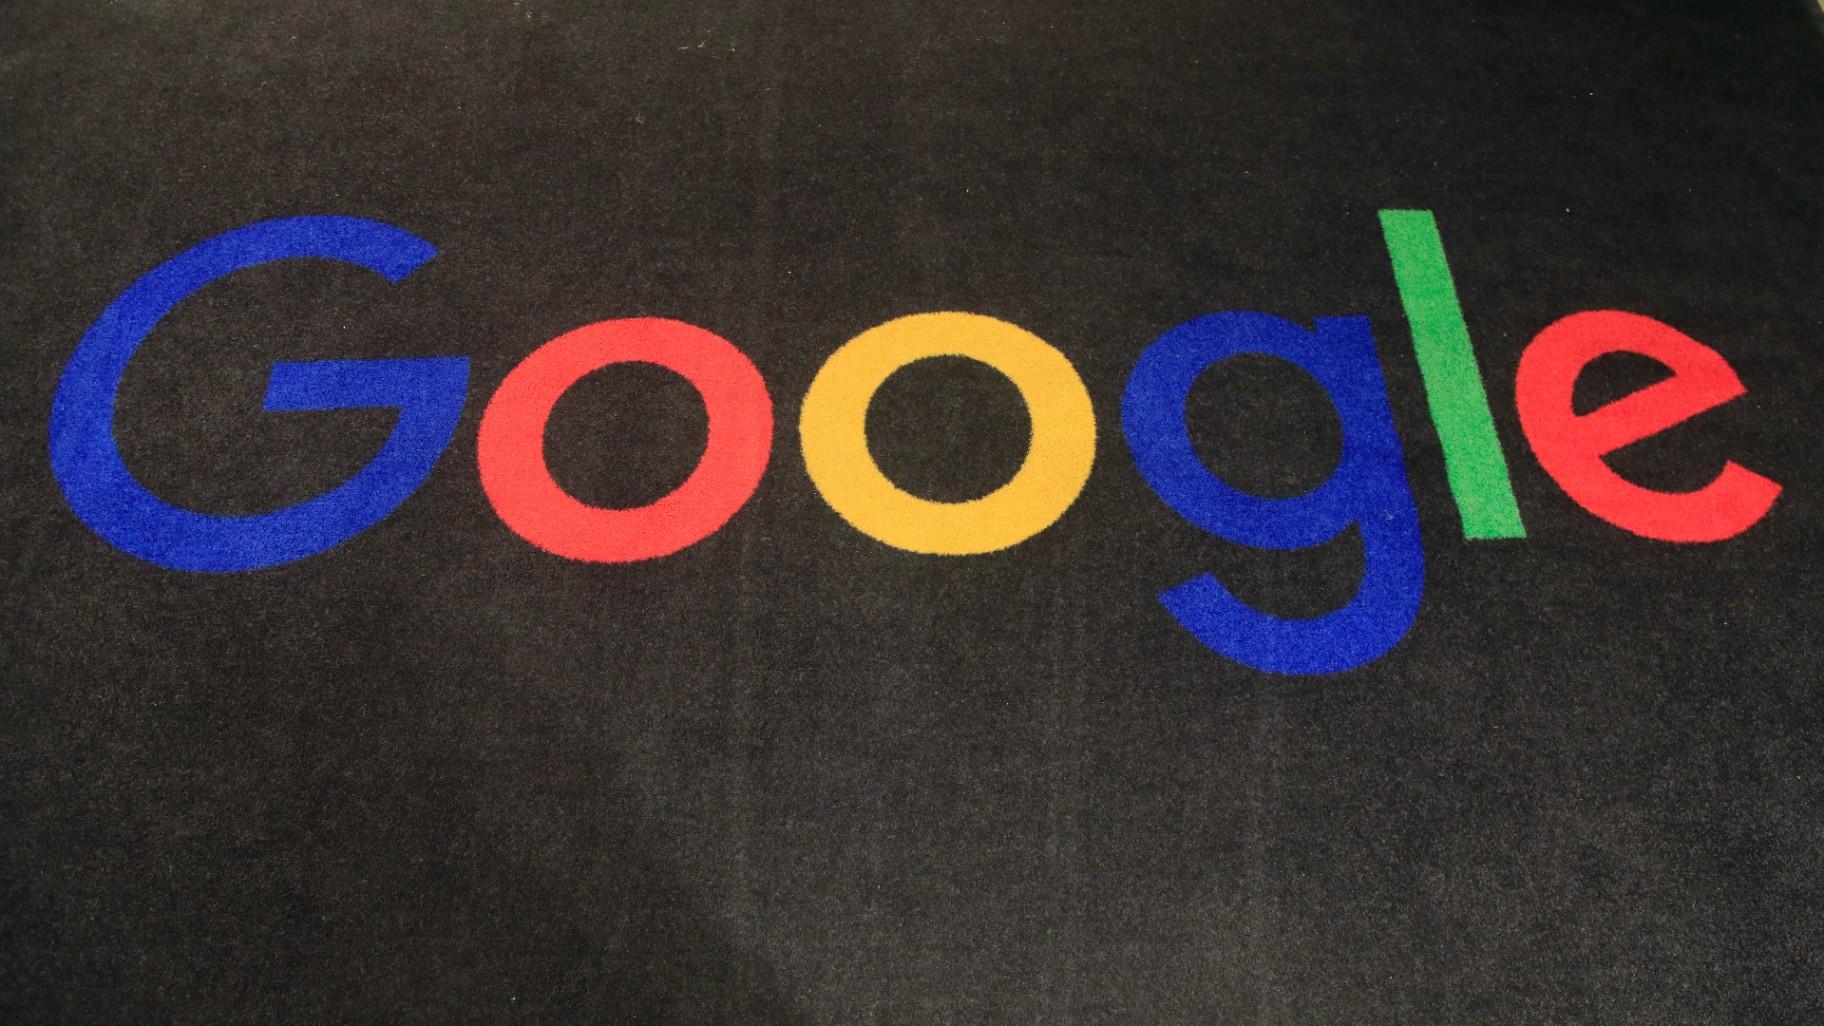 The logo of Google is displayed on a carpet at the entrance hall of Google France in Paris, on Nov. 18, 2019. (AP Photo / Michel Euler, File)